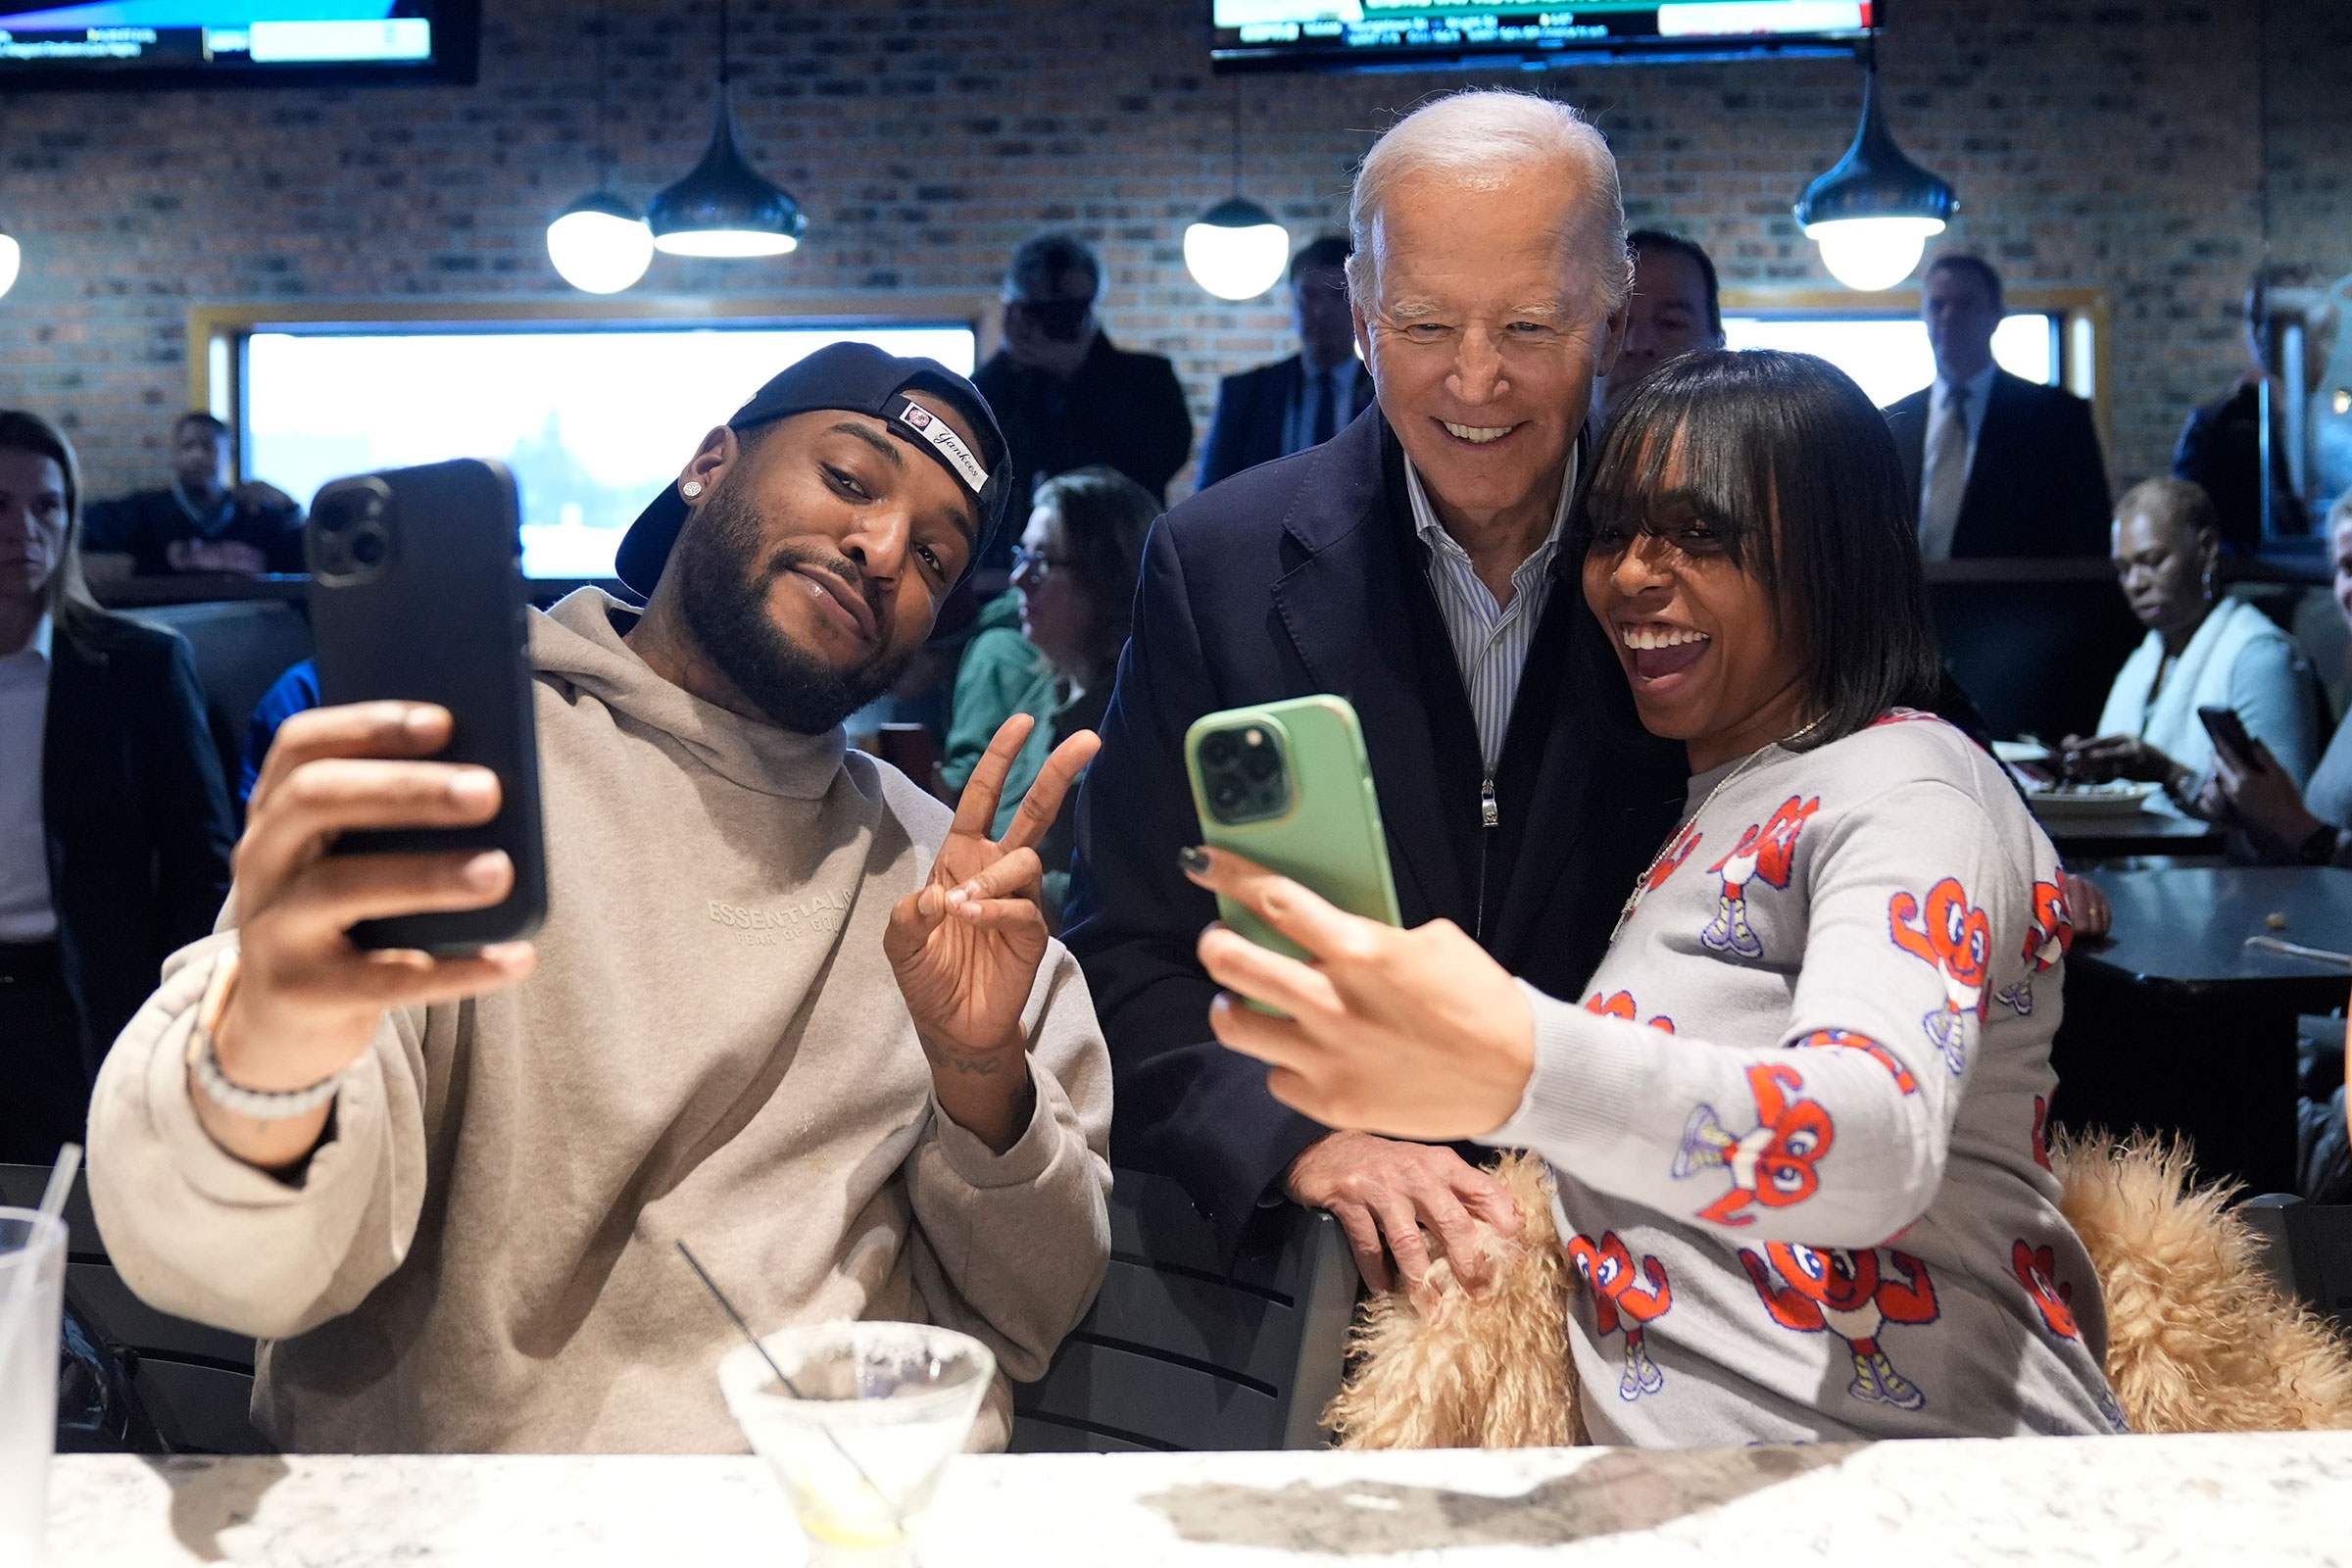 President Joe Biden, center, takes photos with patrons at They Say restaurant during a campaign stop Feb. 1, 2024, in Harper Woods, Michigan. Evan Vucci/AP